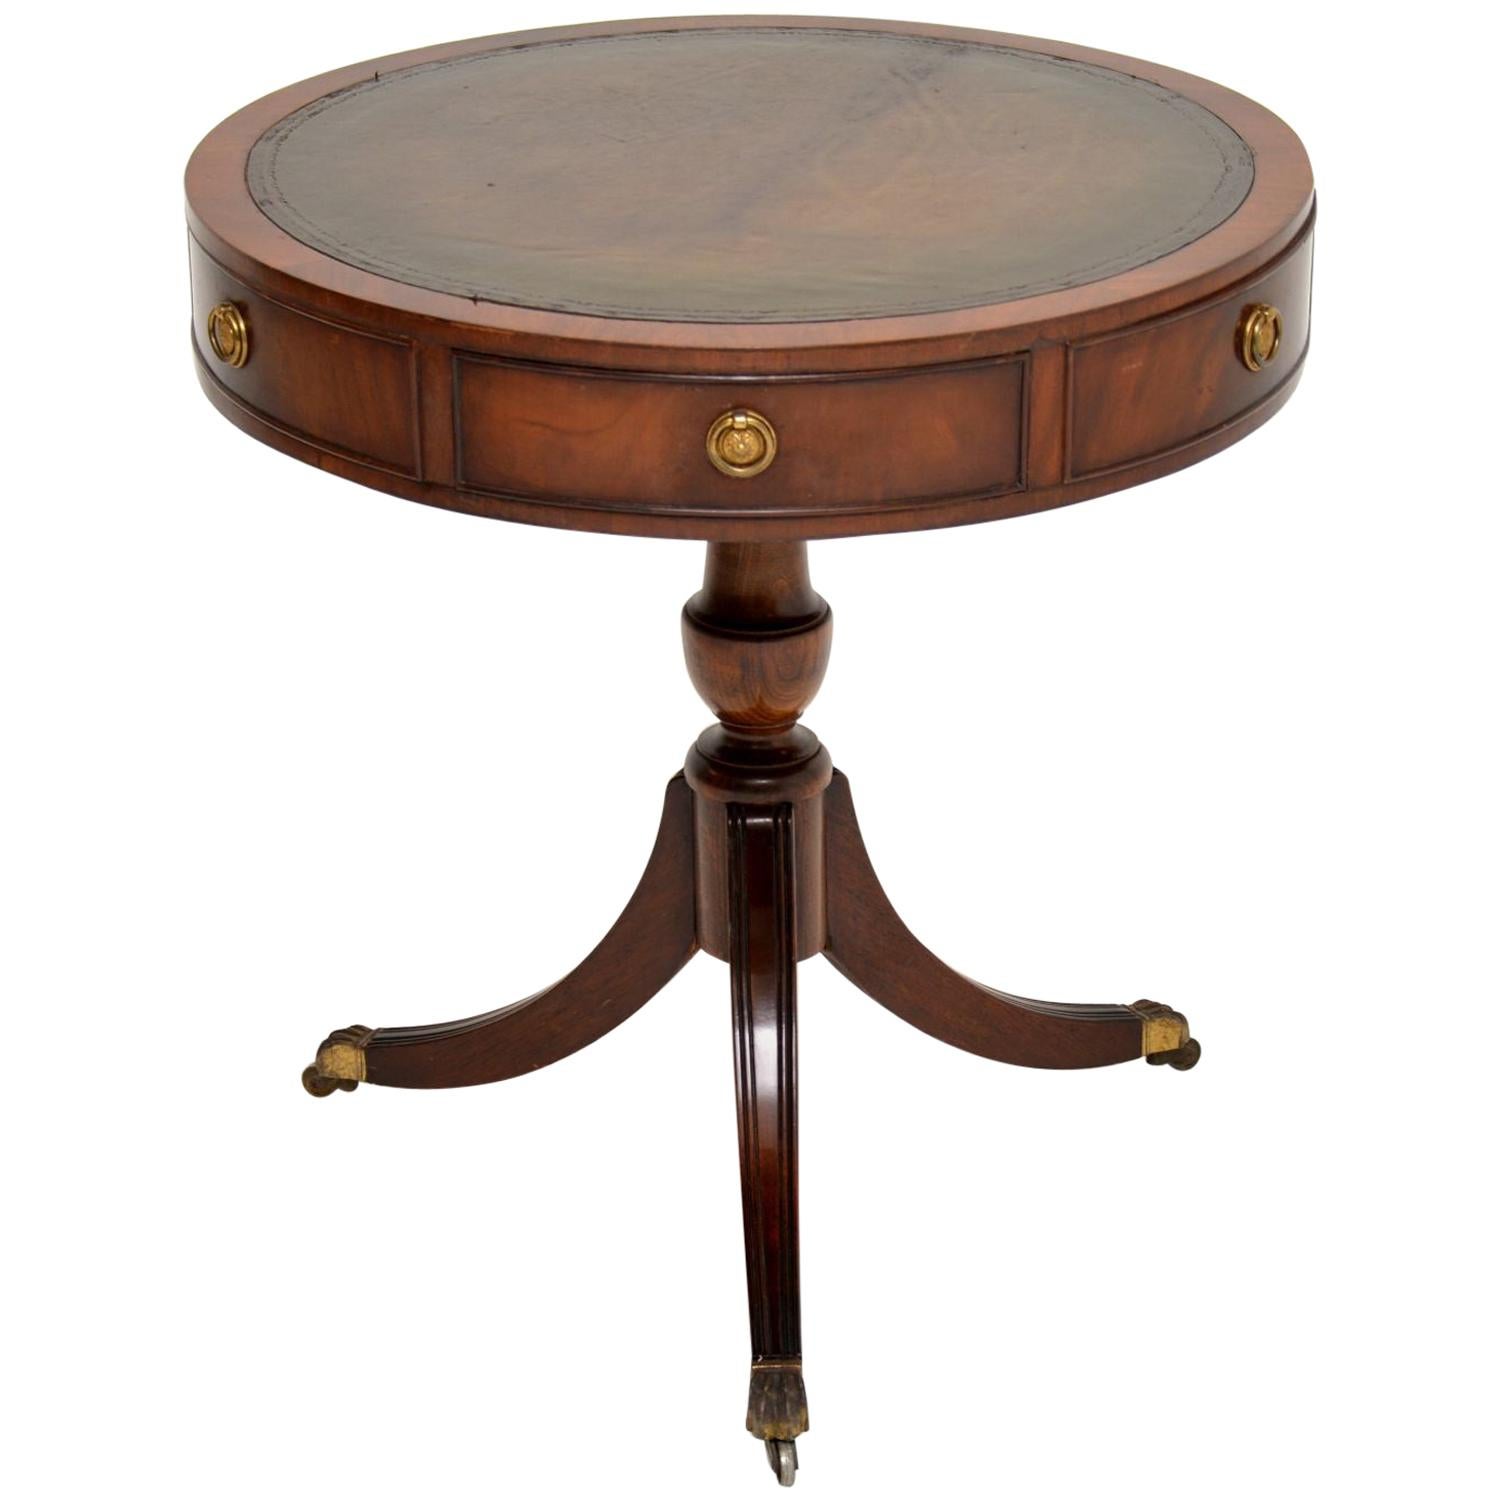 Antique Regency Style Mahogany and Leather Drum Table